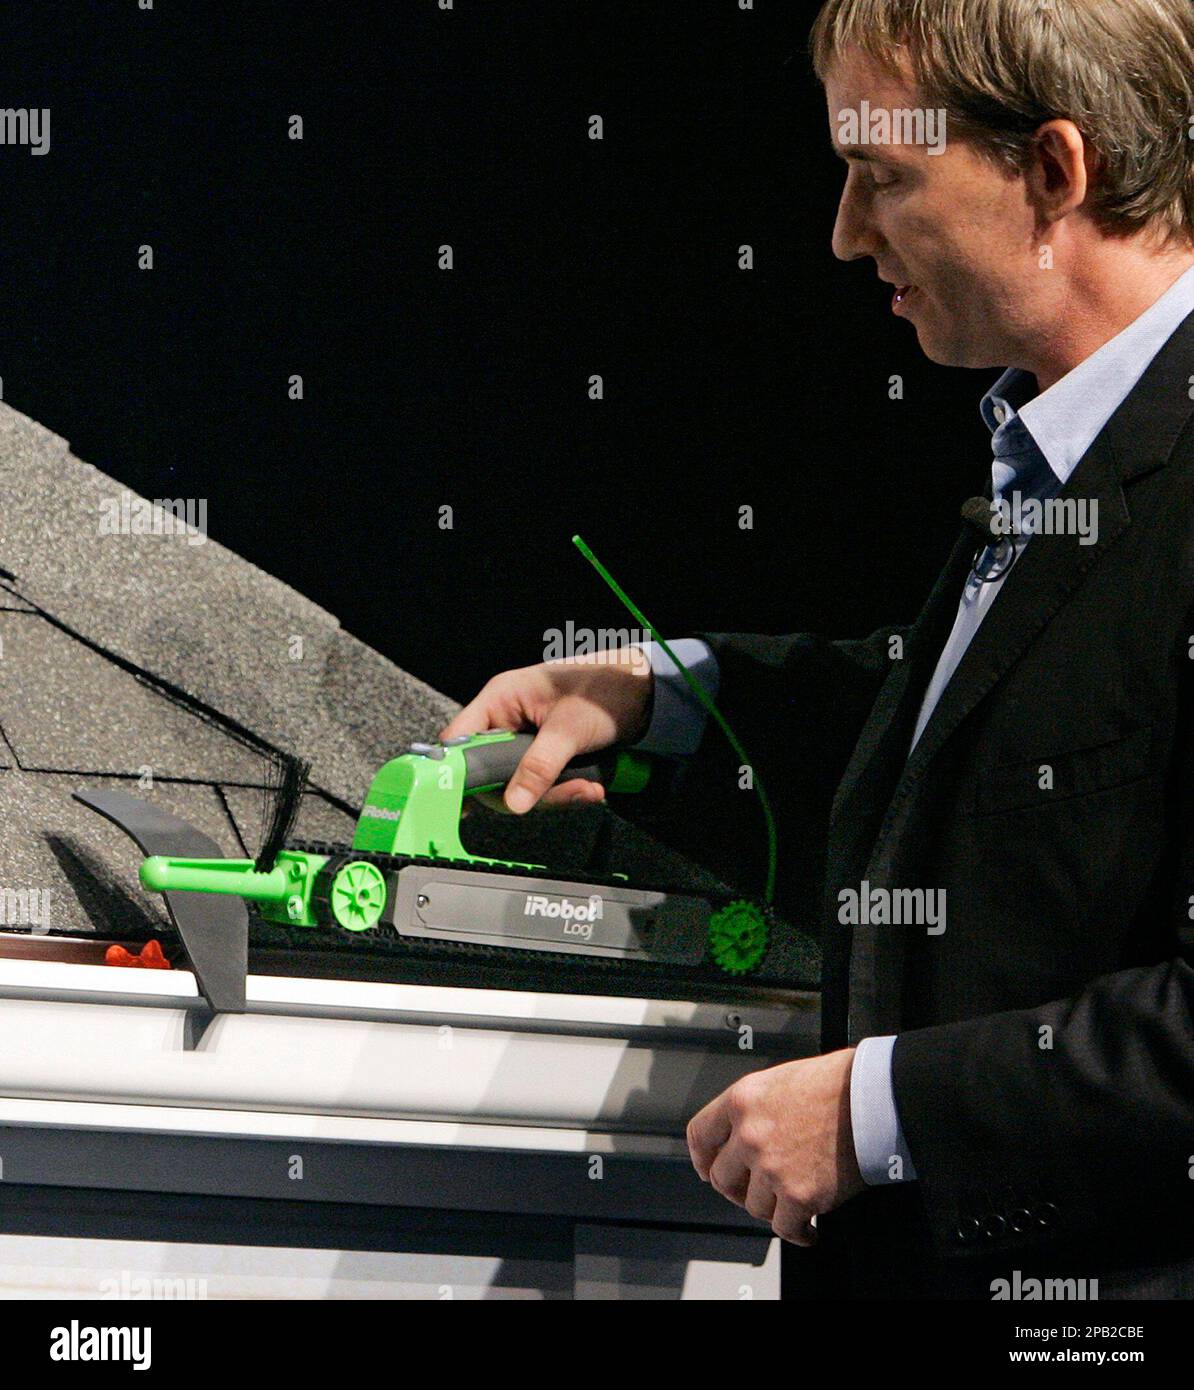 Colin Angle, iRobot co-founder and CEO, demonstrates his company's new iRobot  Looj Gutter Cleaning robot during a presentation at the Digial Life trade  show at New York's Javits Convention Center, Thursday, Sept.